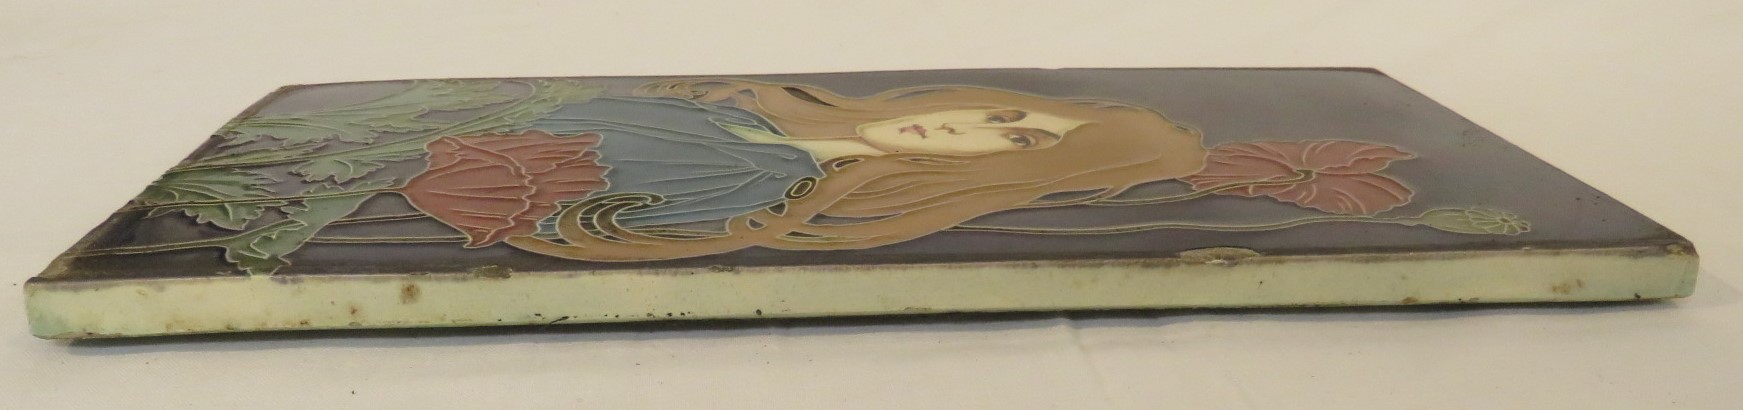 An Art Nouveau ceramic tile by Carl Sigmund Luber, depicting head and shoulders of woman in blue - Image 7 of 14